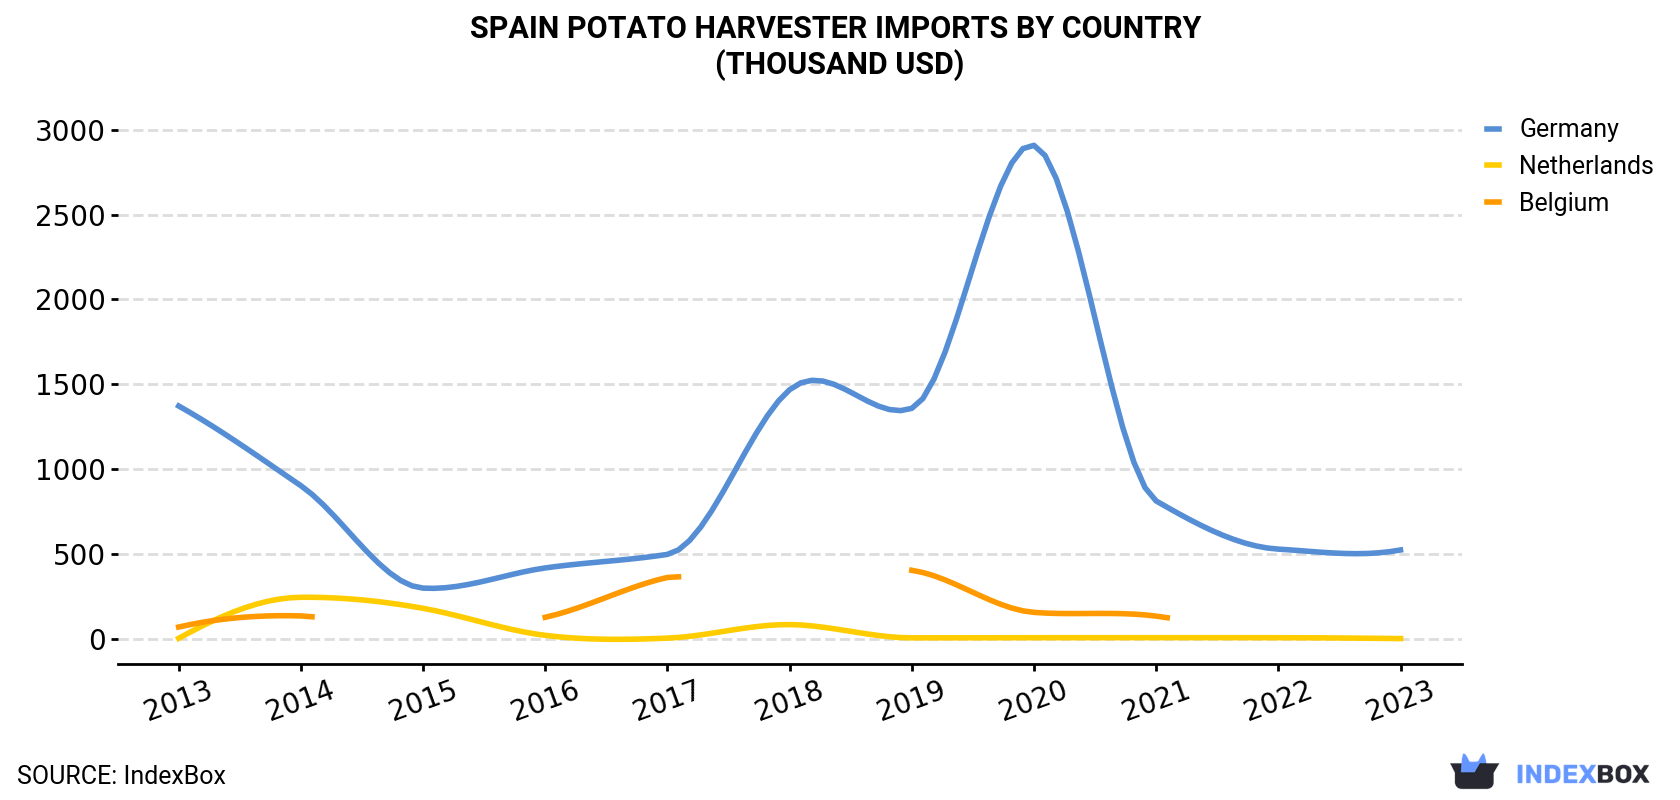 Spain Potato Harvester Imports By Country (Thousand USD)